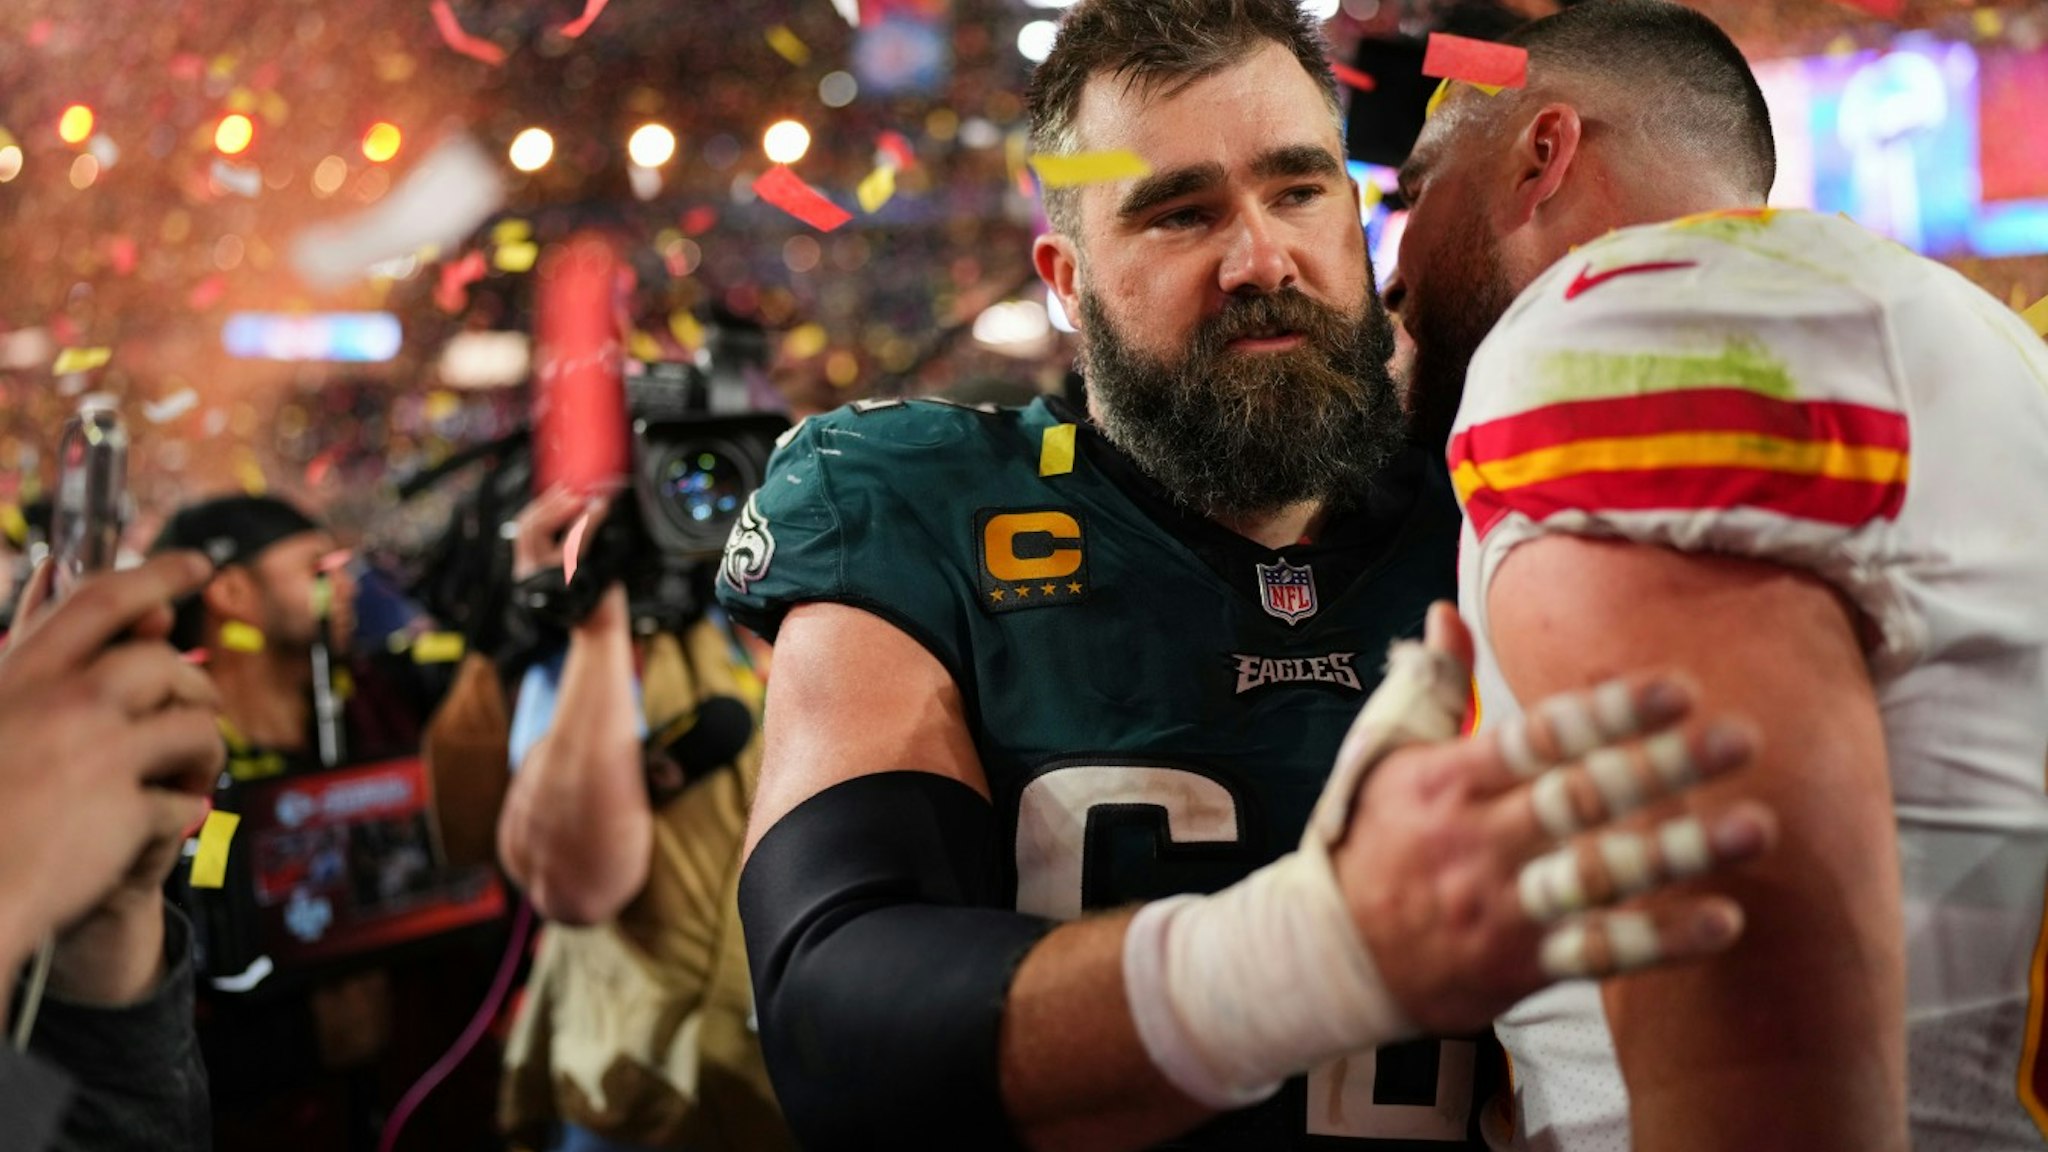 Jason Kelce #62 of the Philadelphia Eagles speaks with Travis Kelce #87 of the Kansas City Chiefs after Super Bowl LVII at State Farm Stadium on February 12, 2023 in Glendale, Arizona.